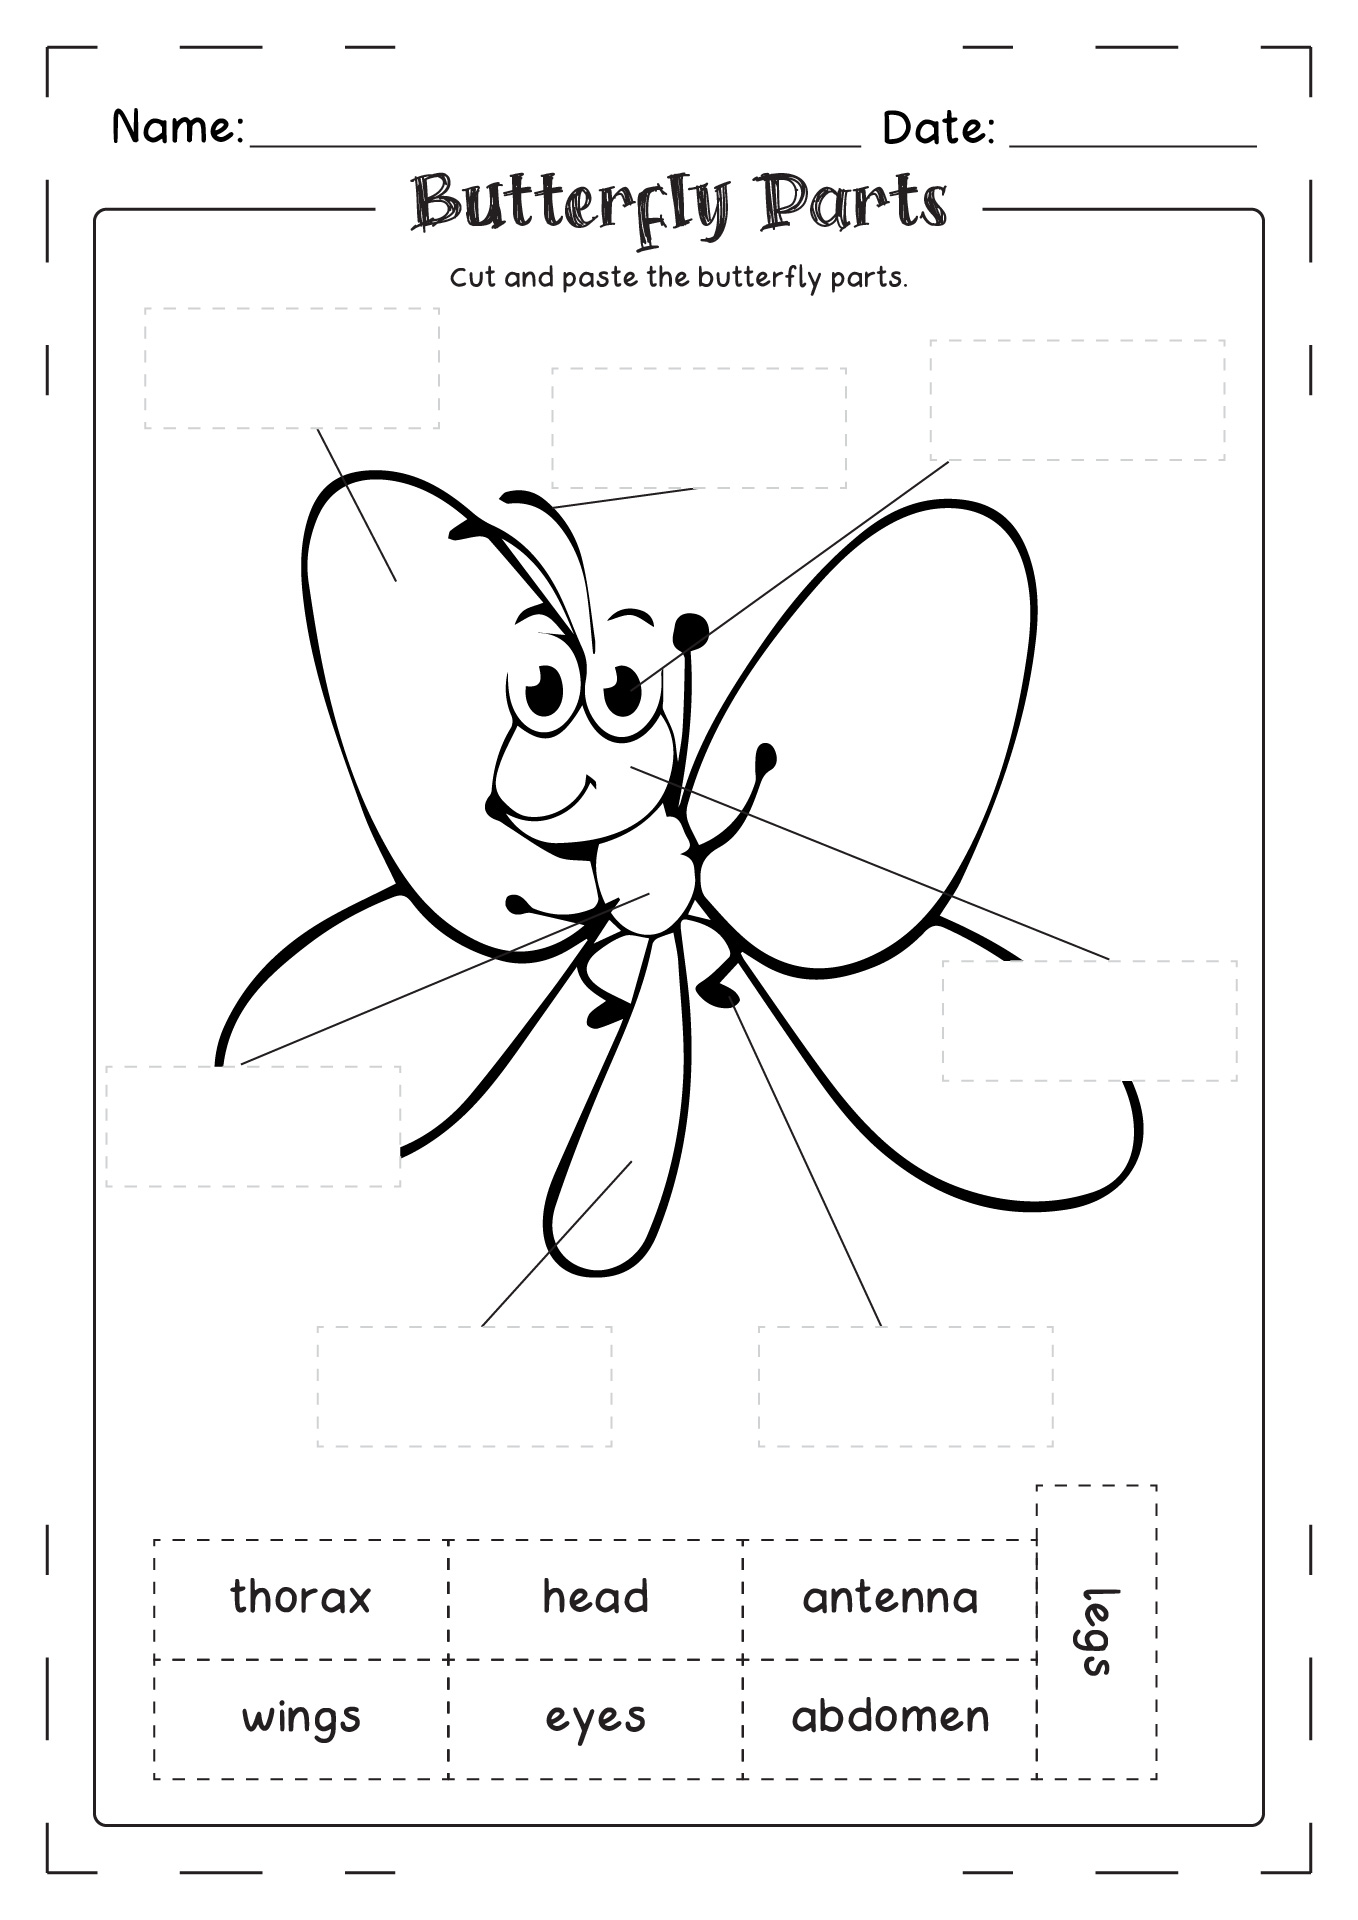 Butterfly Parts Worksheet